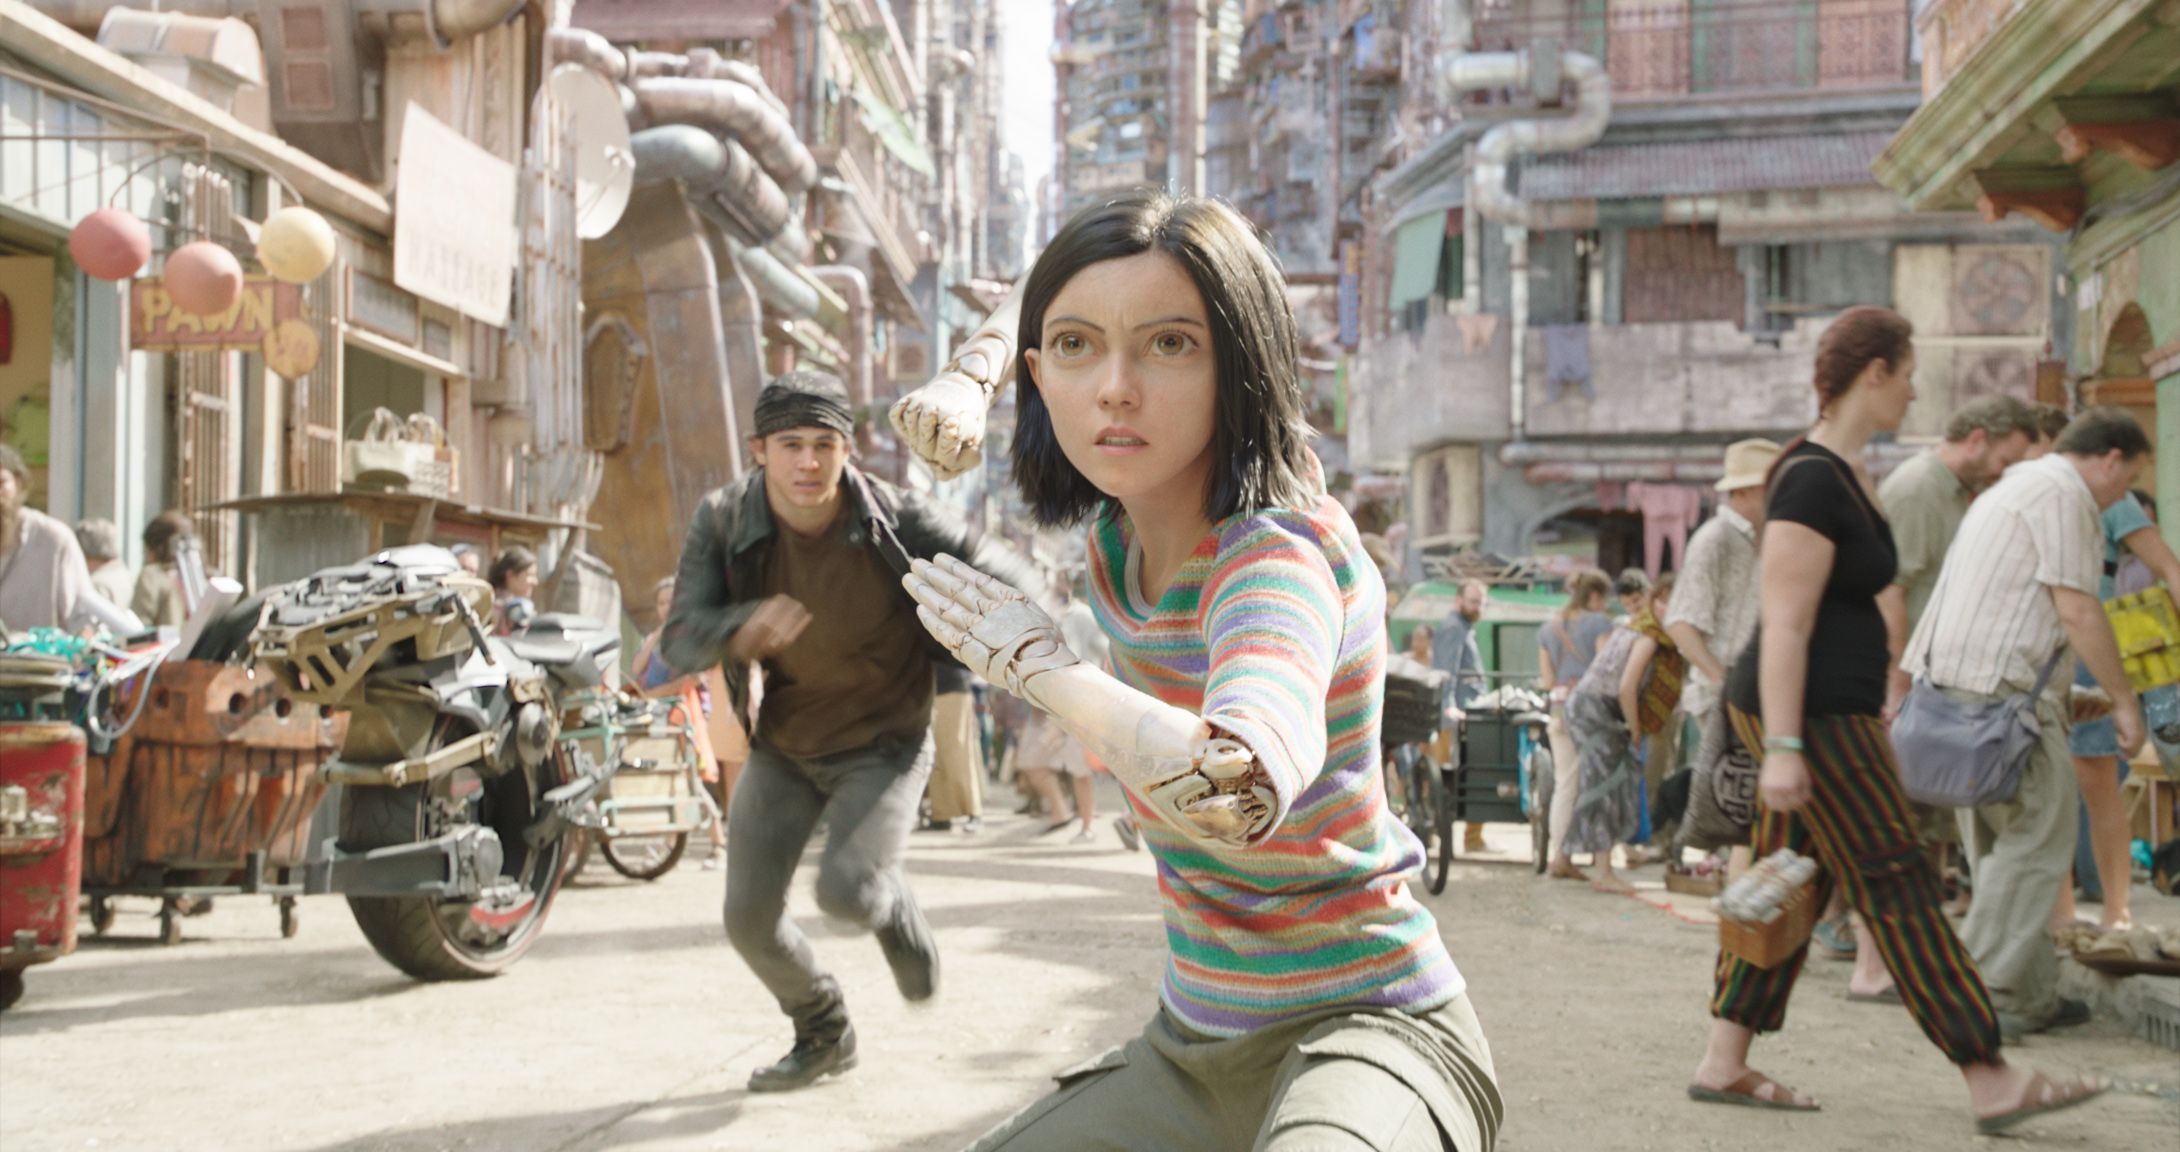 Alita Battle Angel 2 potential release date, news and more